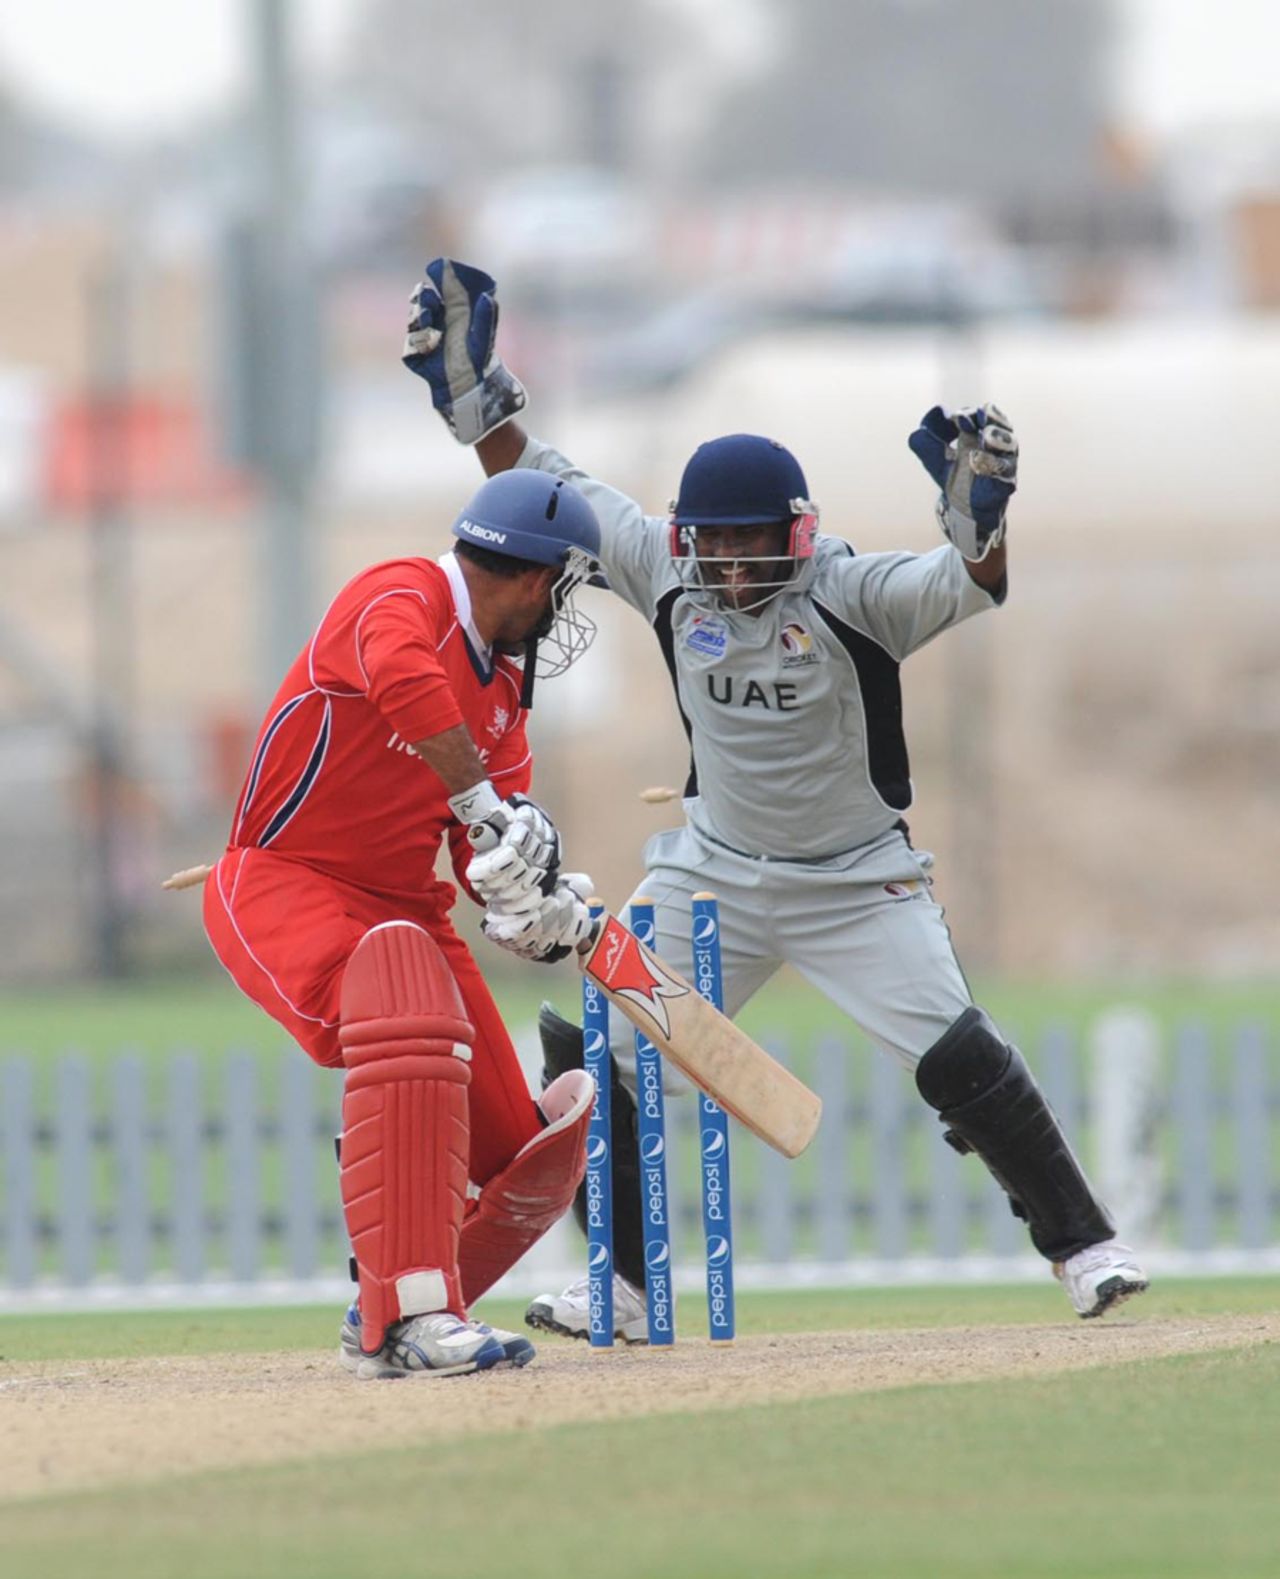 Hong Kong captain Najeeb Amar is clean bowled by Mohammed Tauqir for 15